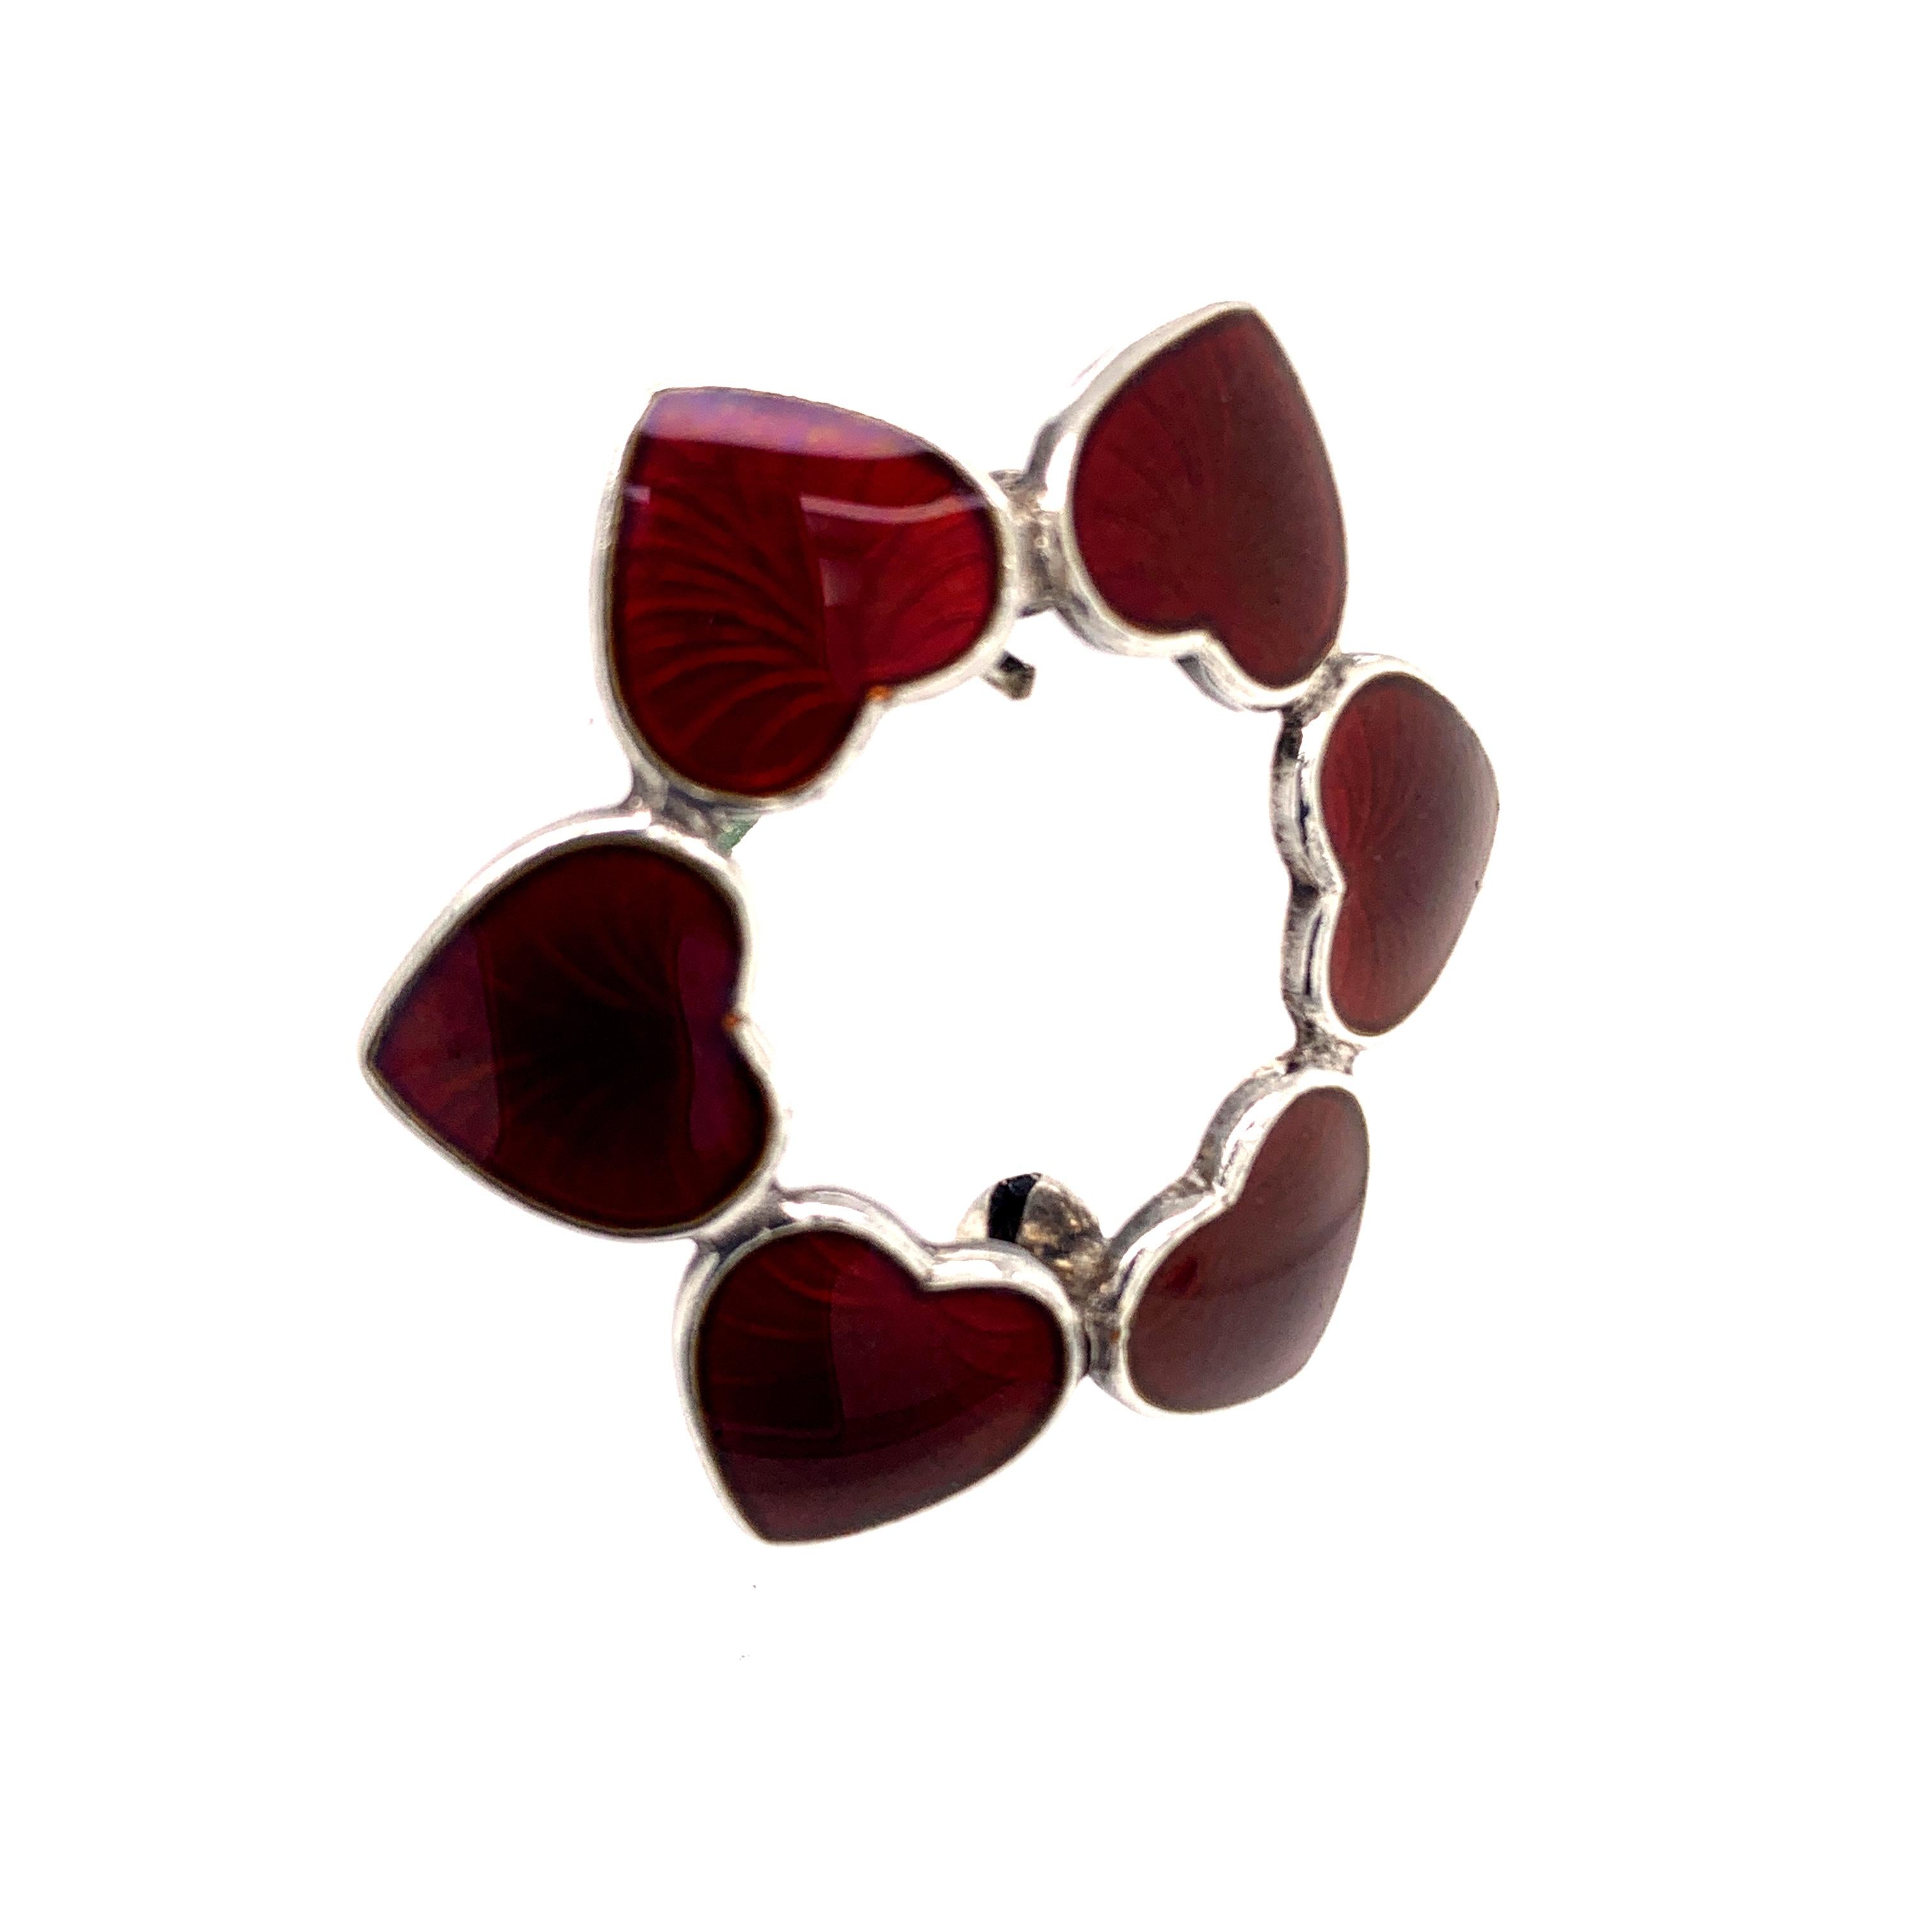 Very sweet pin:  a circle of red enamel figural 